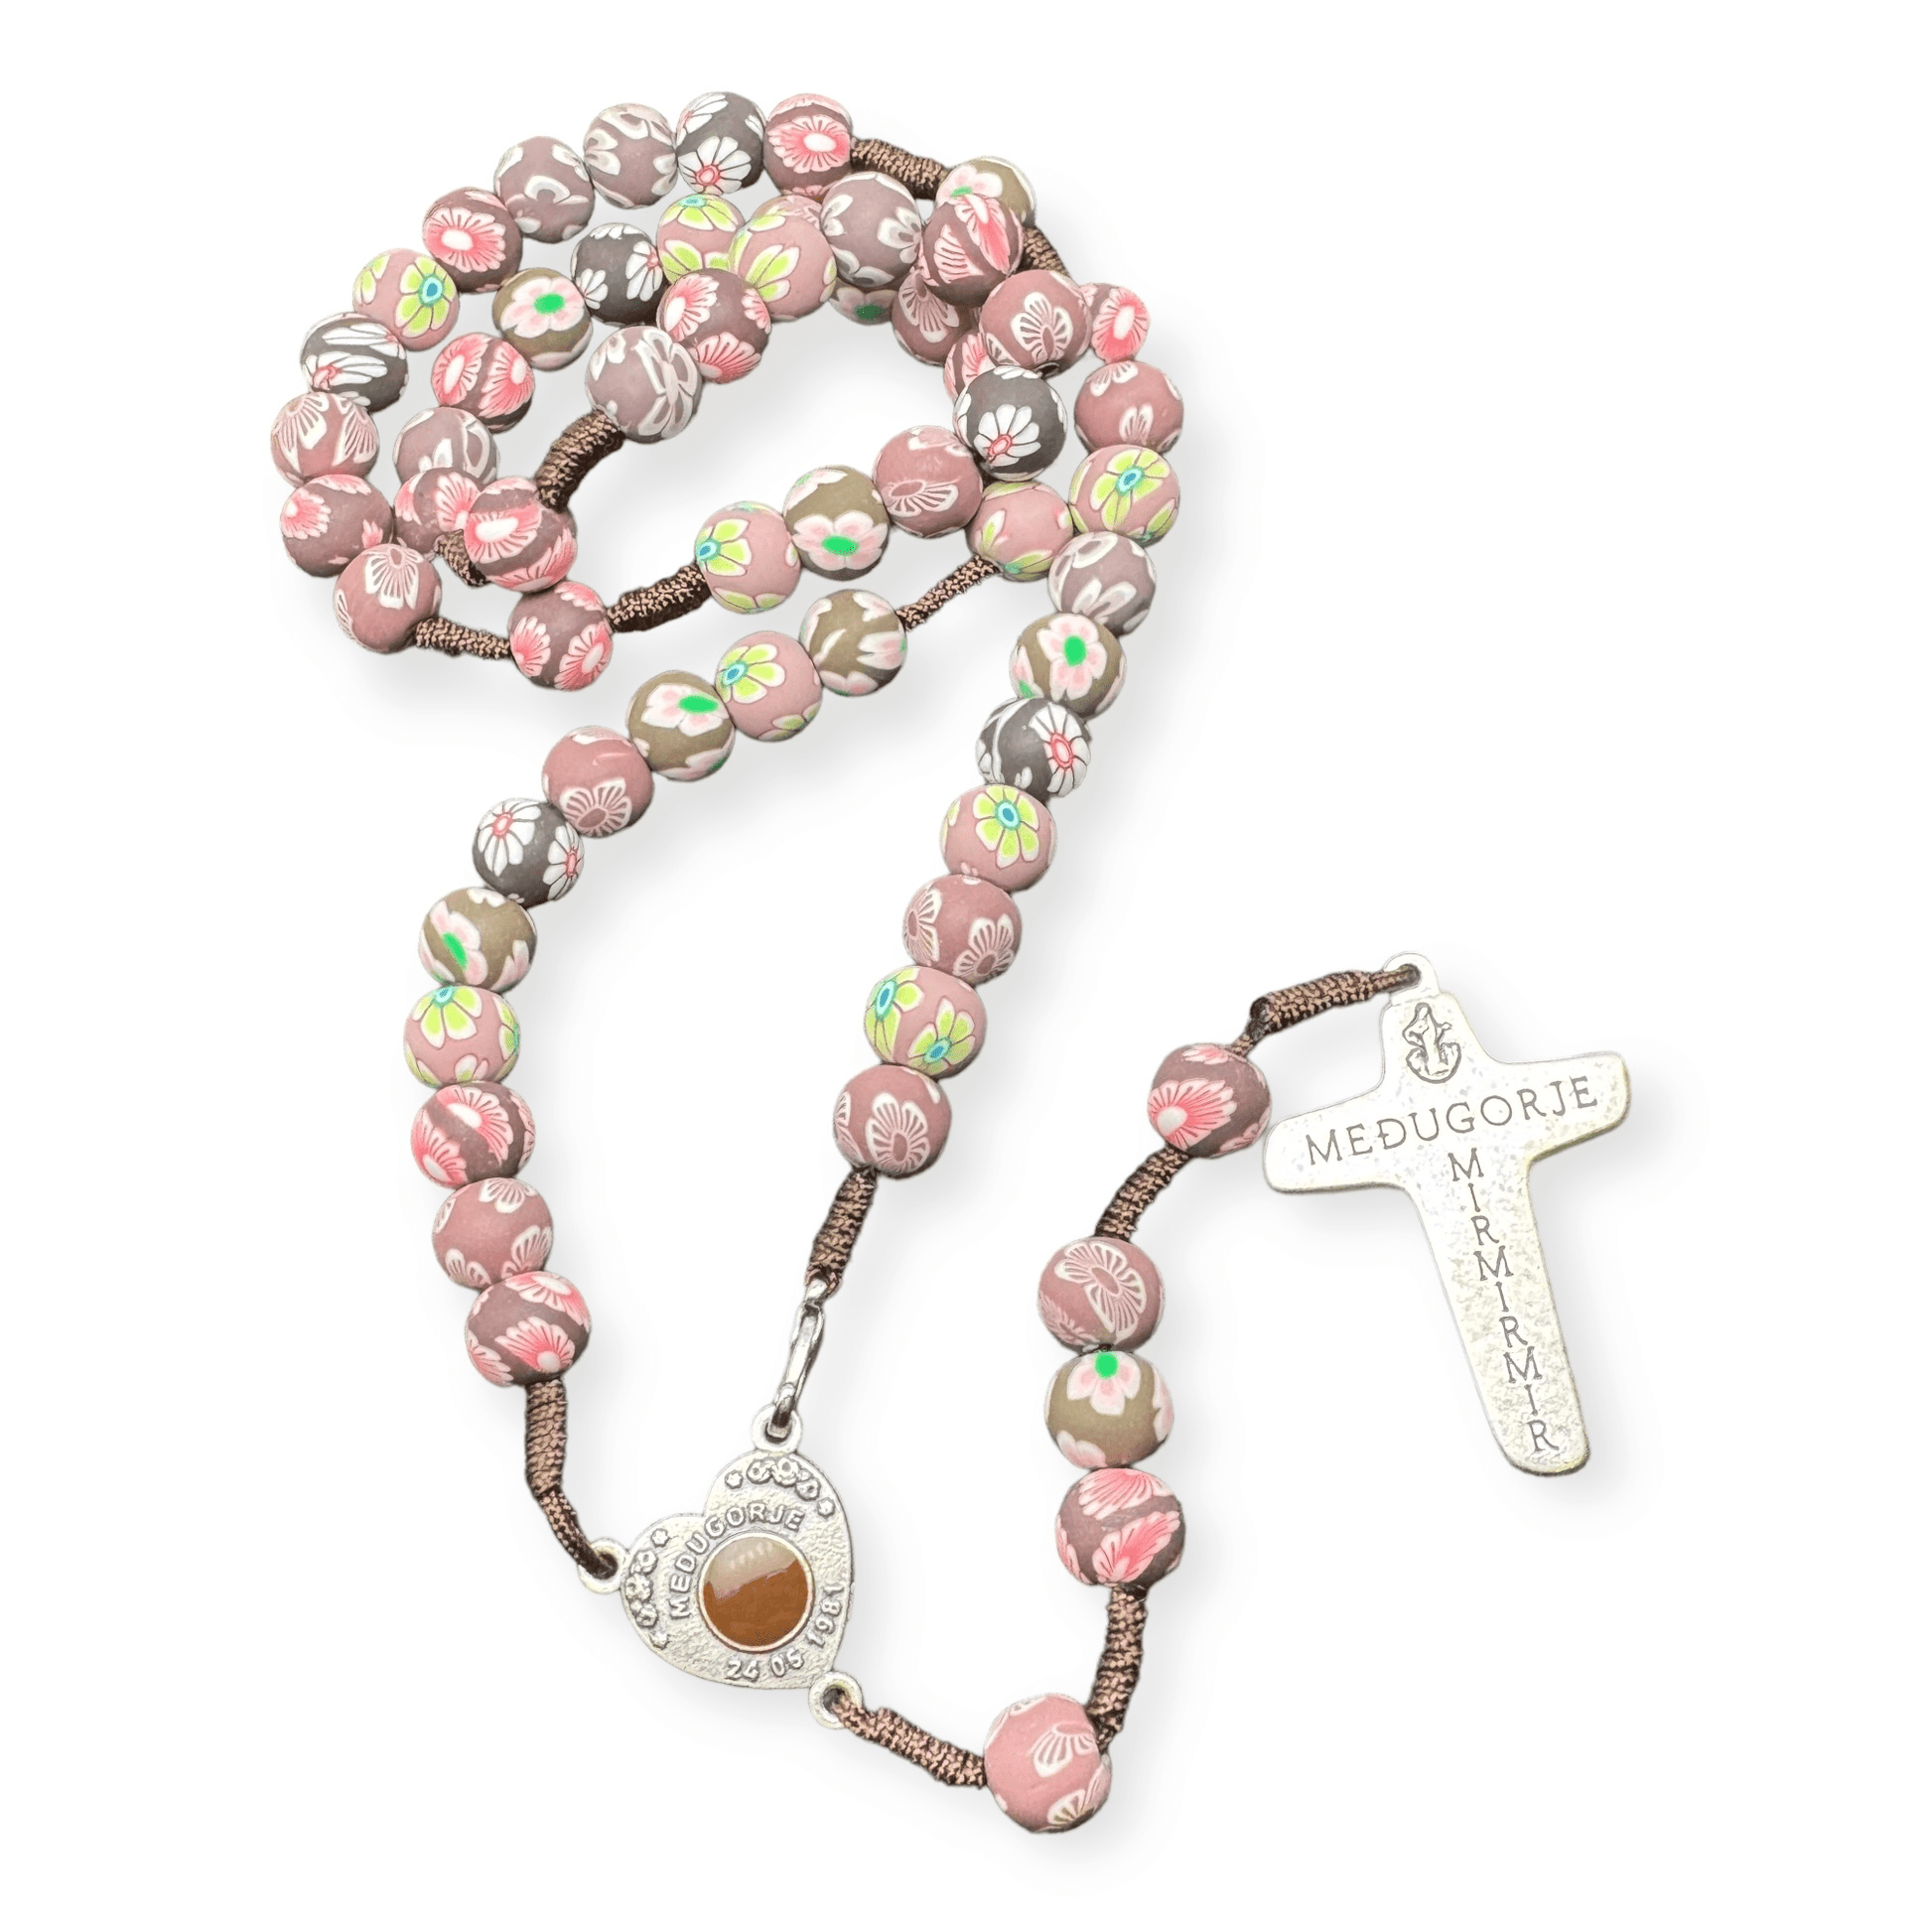 Catholically Rosaries Wonderful Rosary Hand Made By the Nuns of Medjugorje - Blessed By Pope